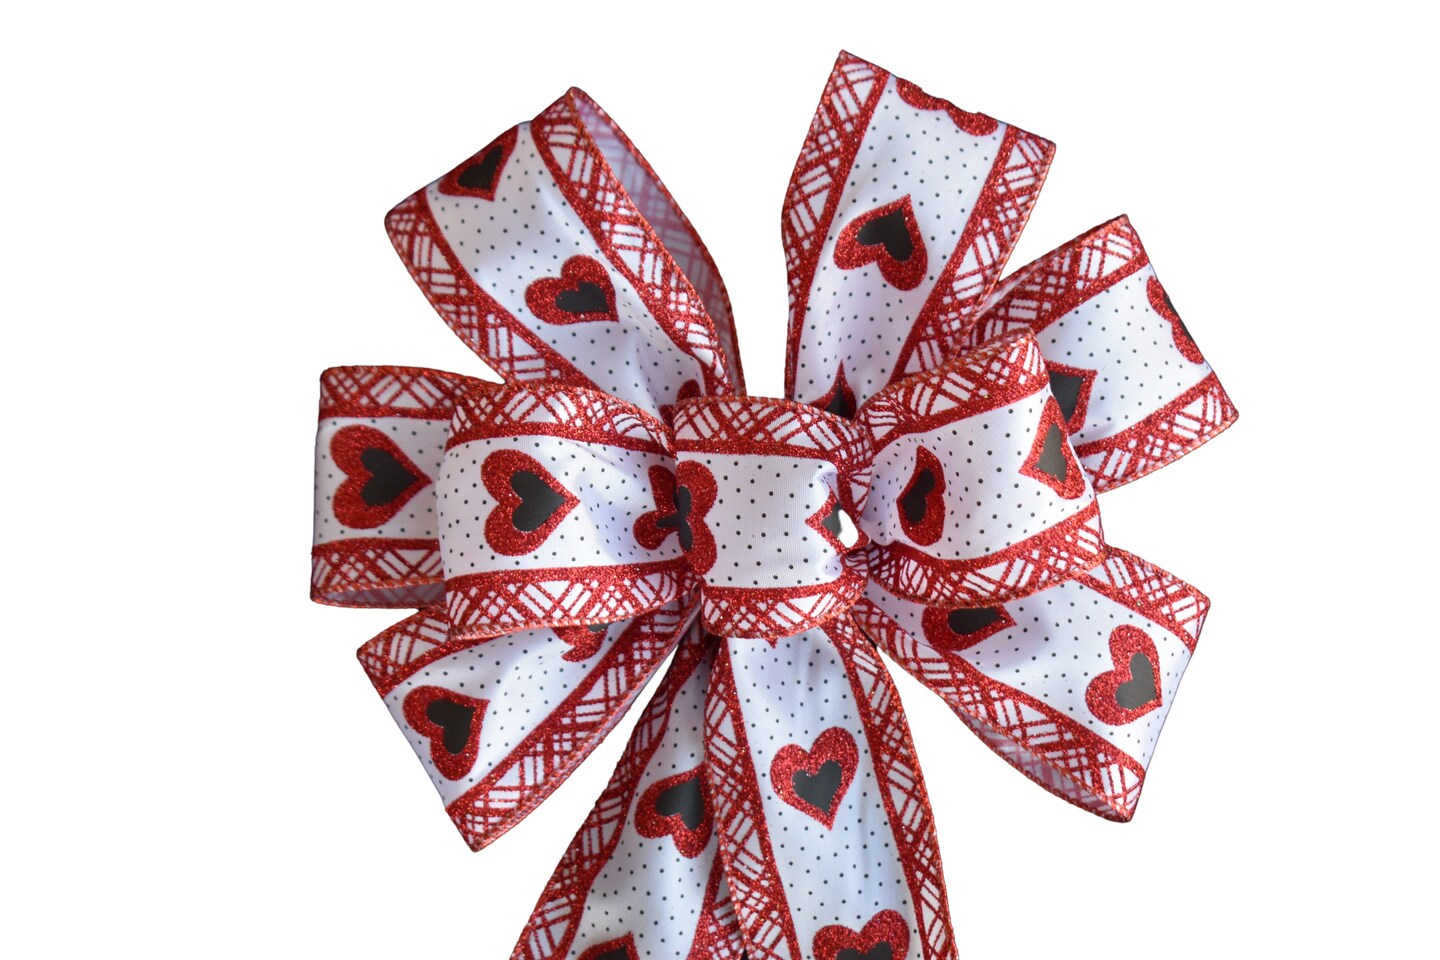 White Striped Hearts Valentine Ribbon – 1 1/2” x 25 Yards, Wired Edge, Red  Hearts, Christmas, Wreath, Wedding, Gift Basket, Gift Wrap, Bows 